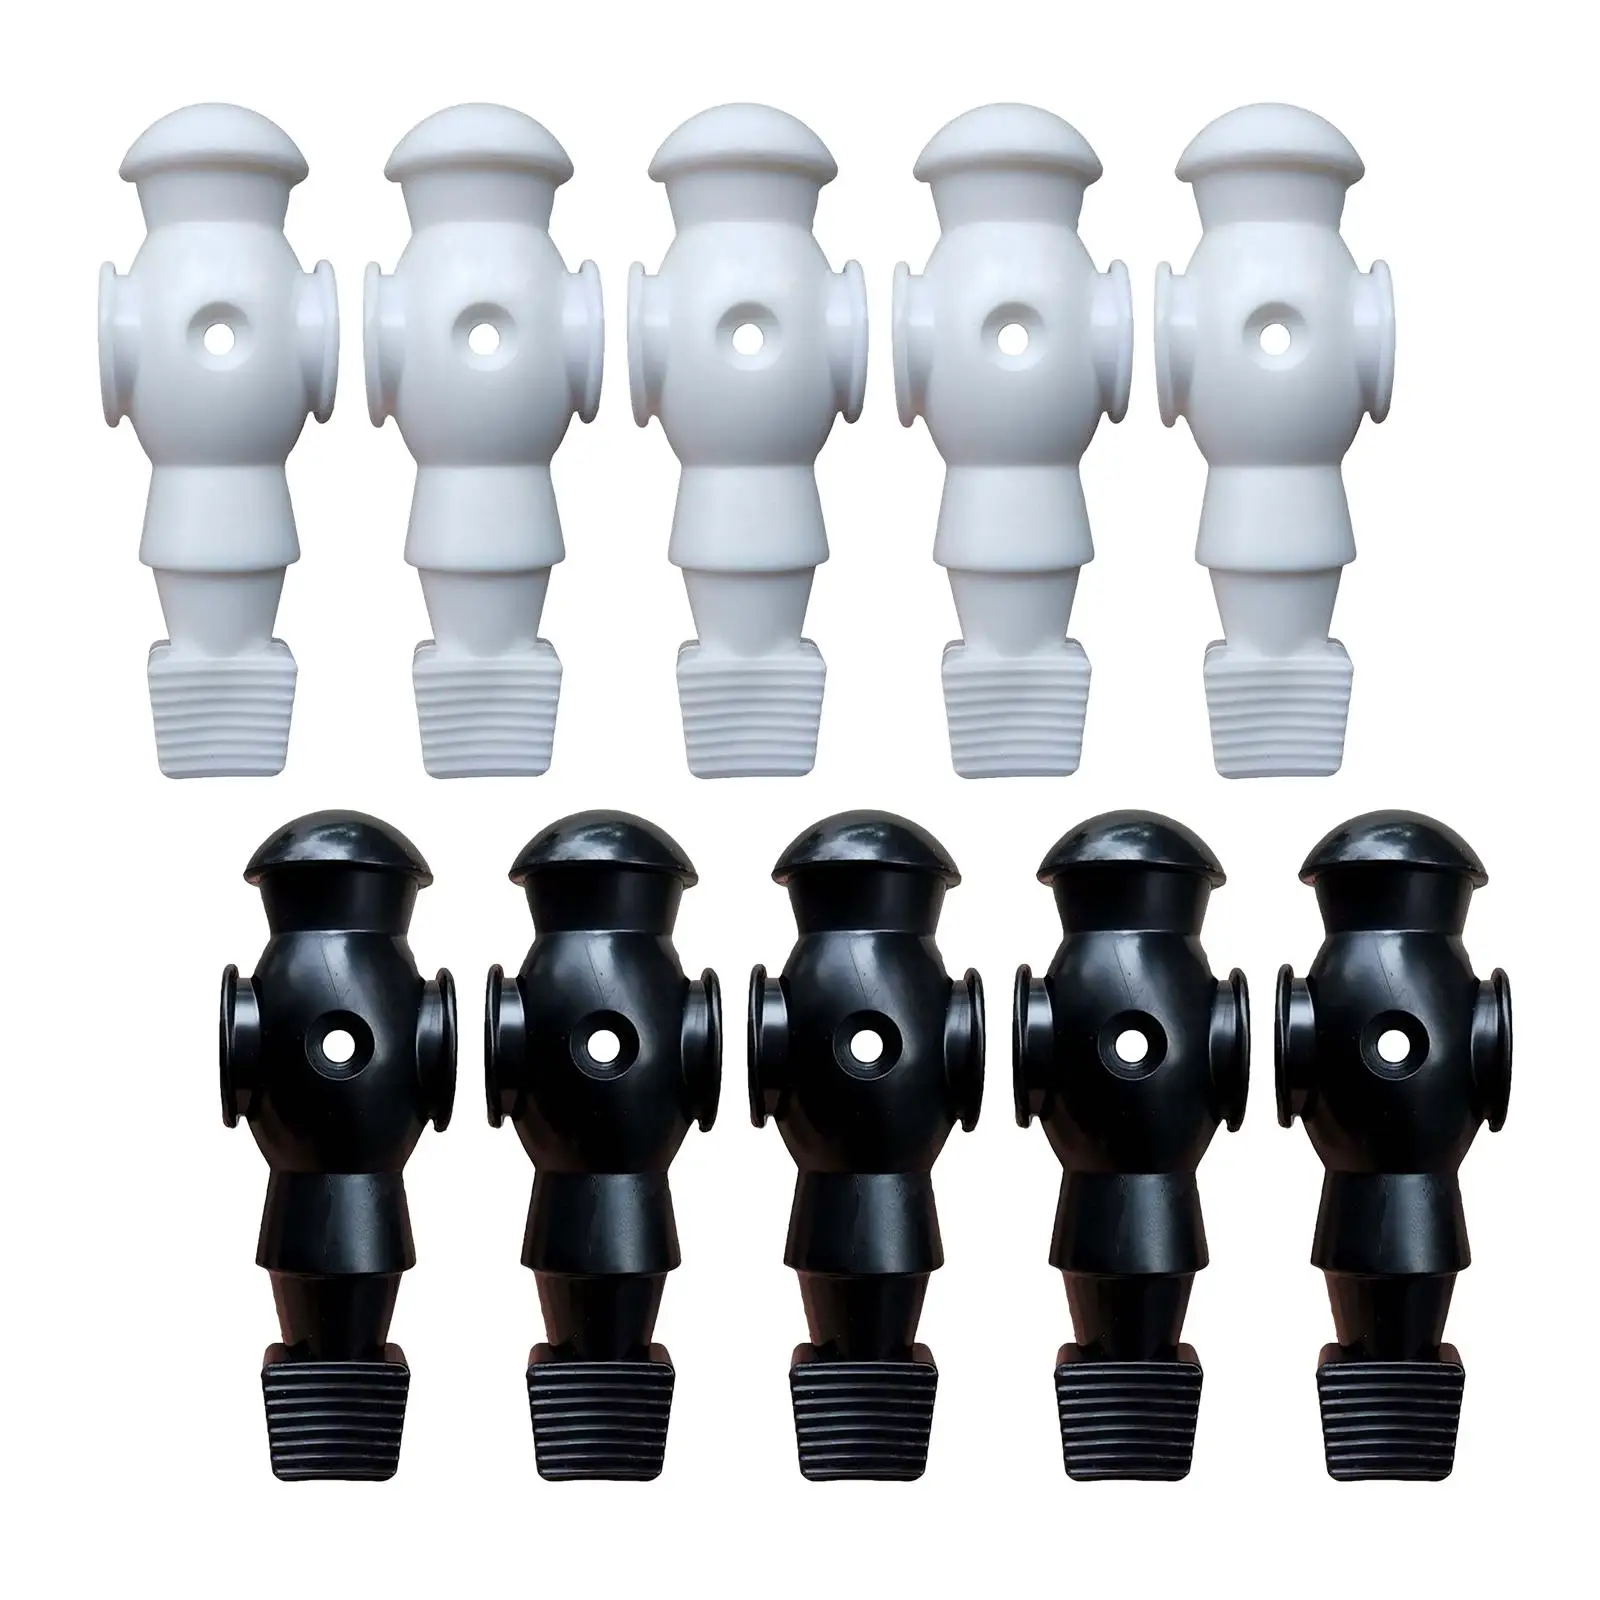 10Pcs Table Soccer Men Player Toys Table Foosball Player Replacement Man Foosball Table Parts Foosball Players for Game Room